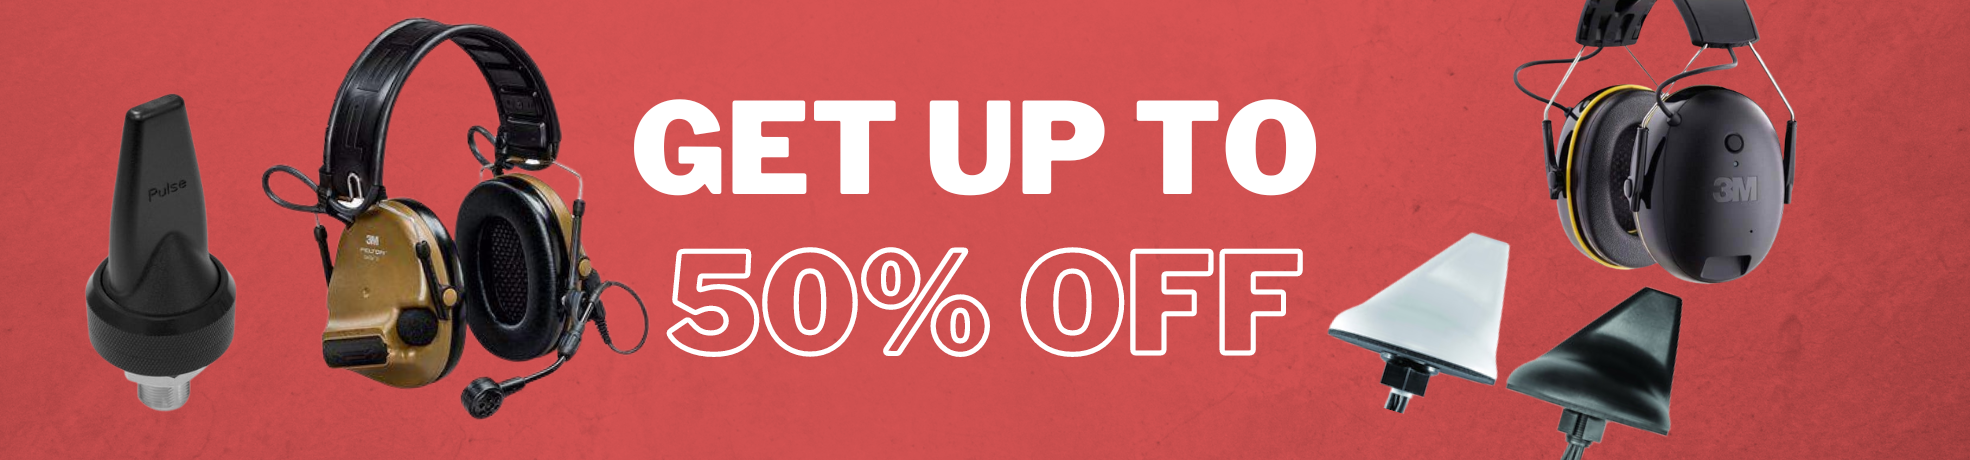 Get up to 50% off